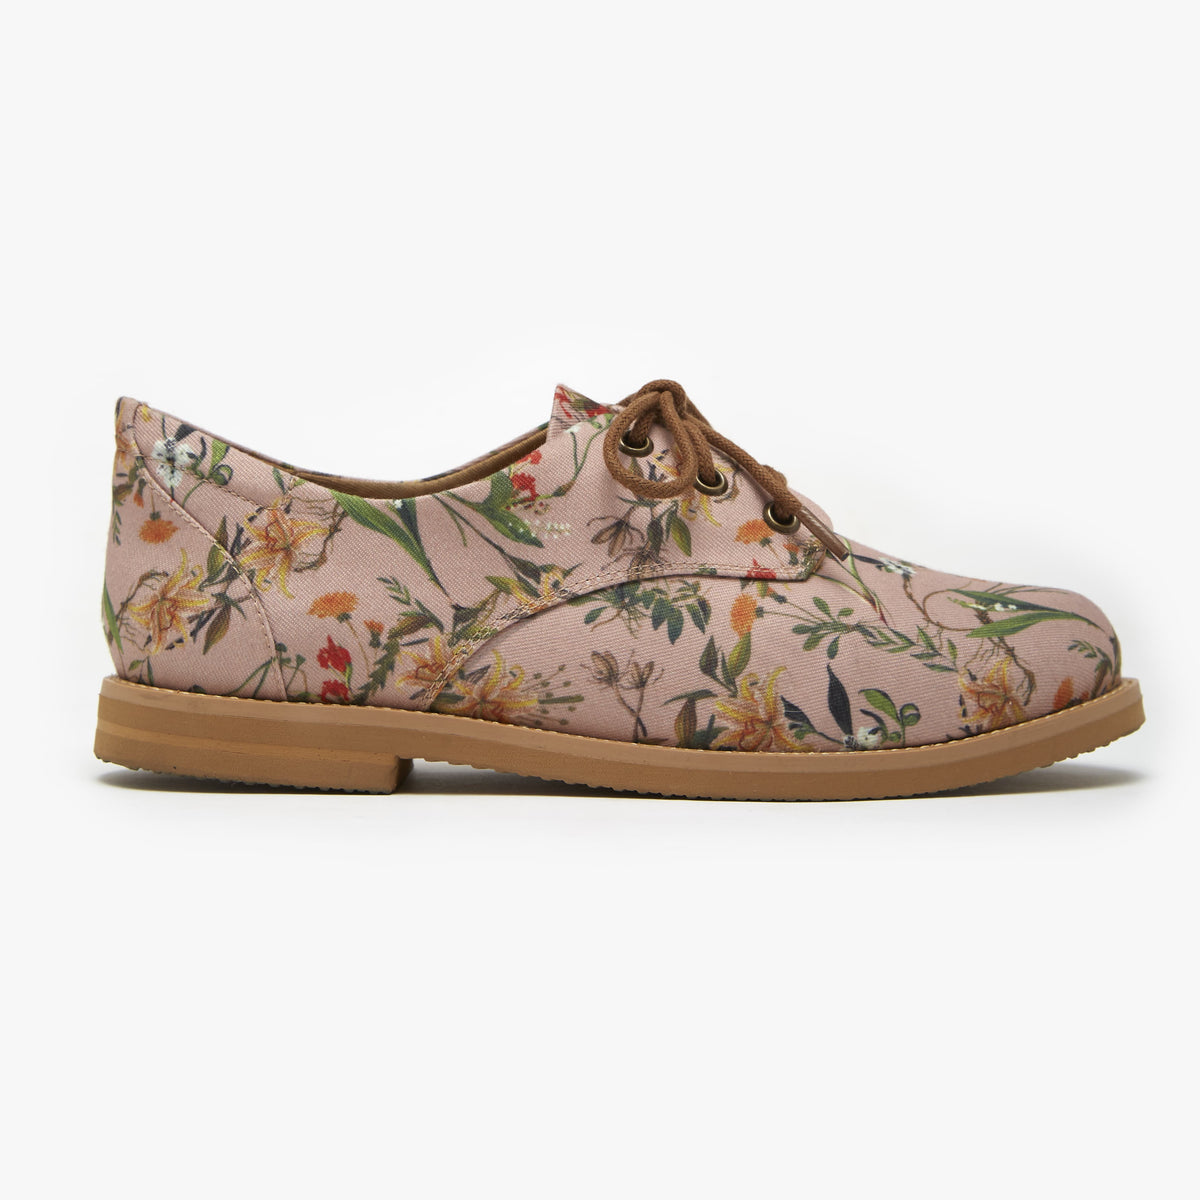 Lilium Oxford– Insecta Shoes